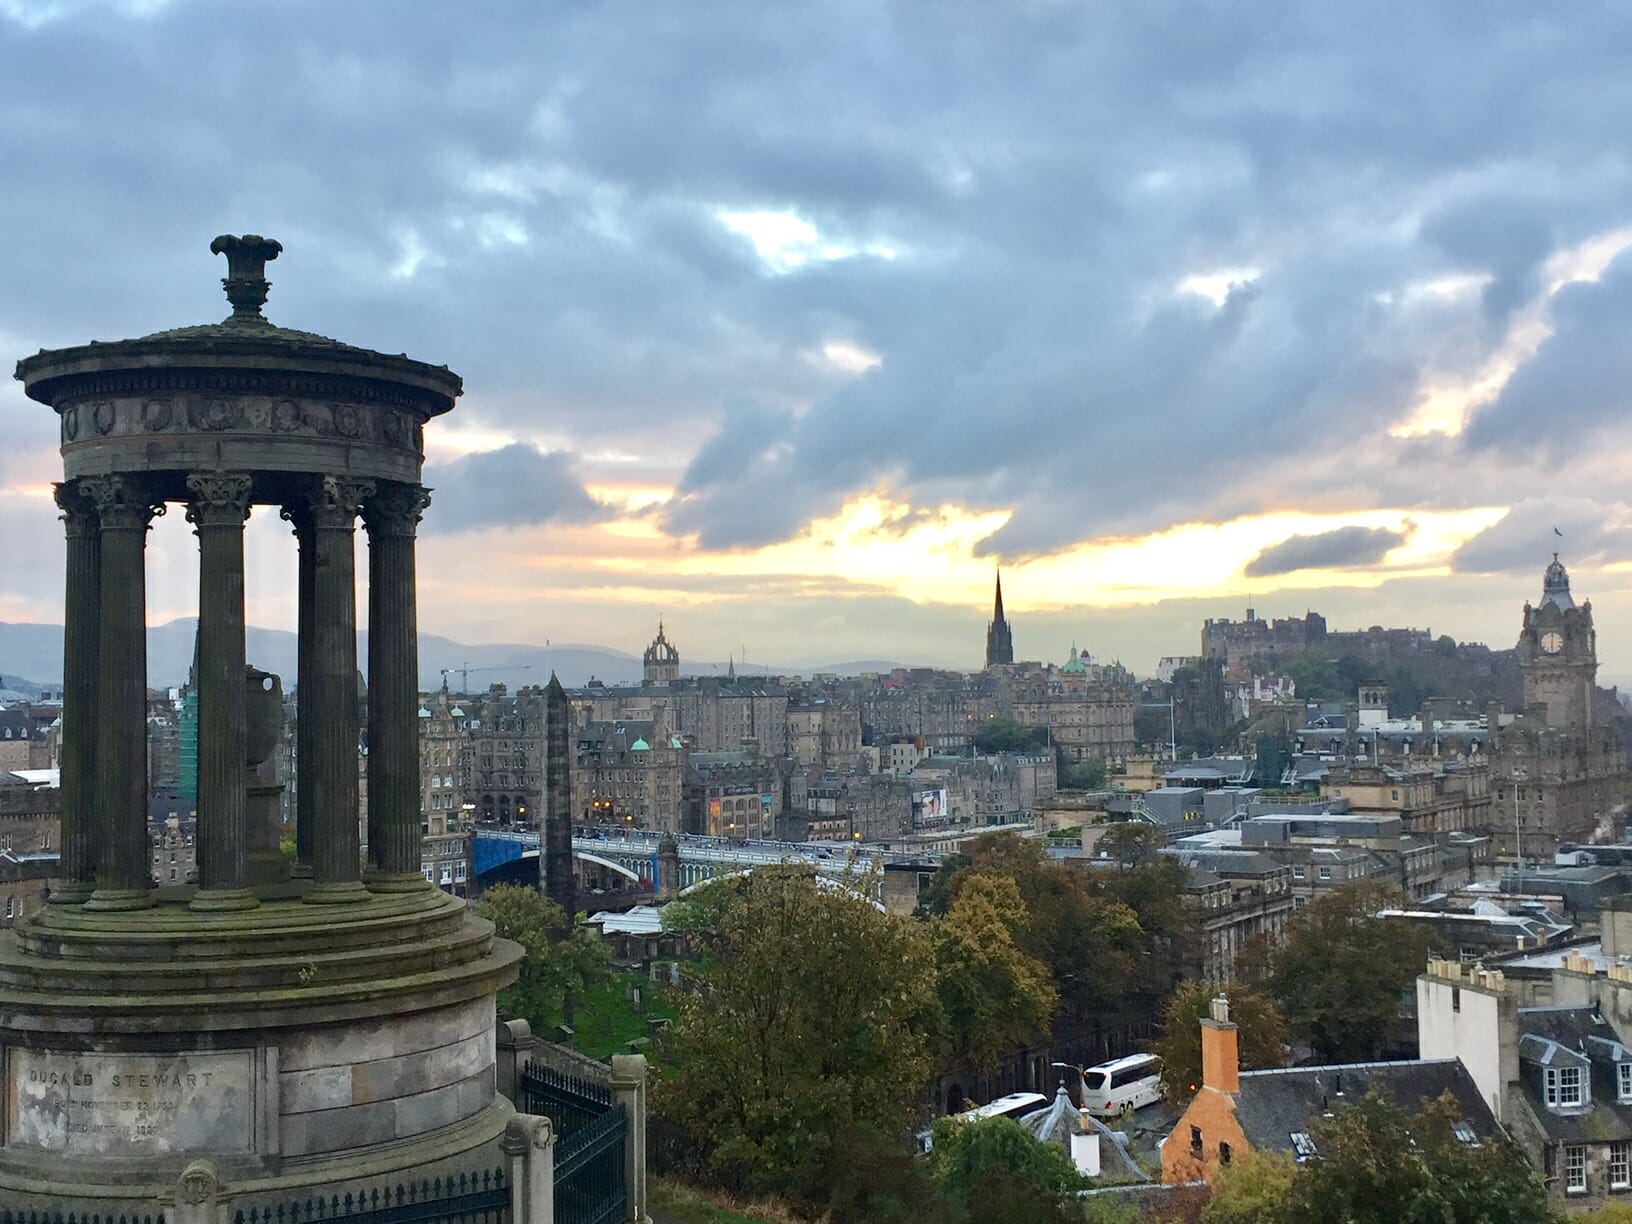 The stunning view of Edinburgh at sunset from the Calton Hill